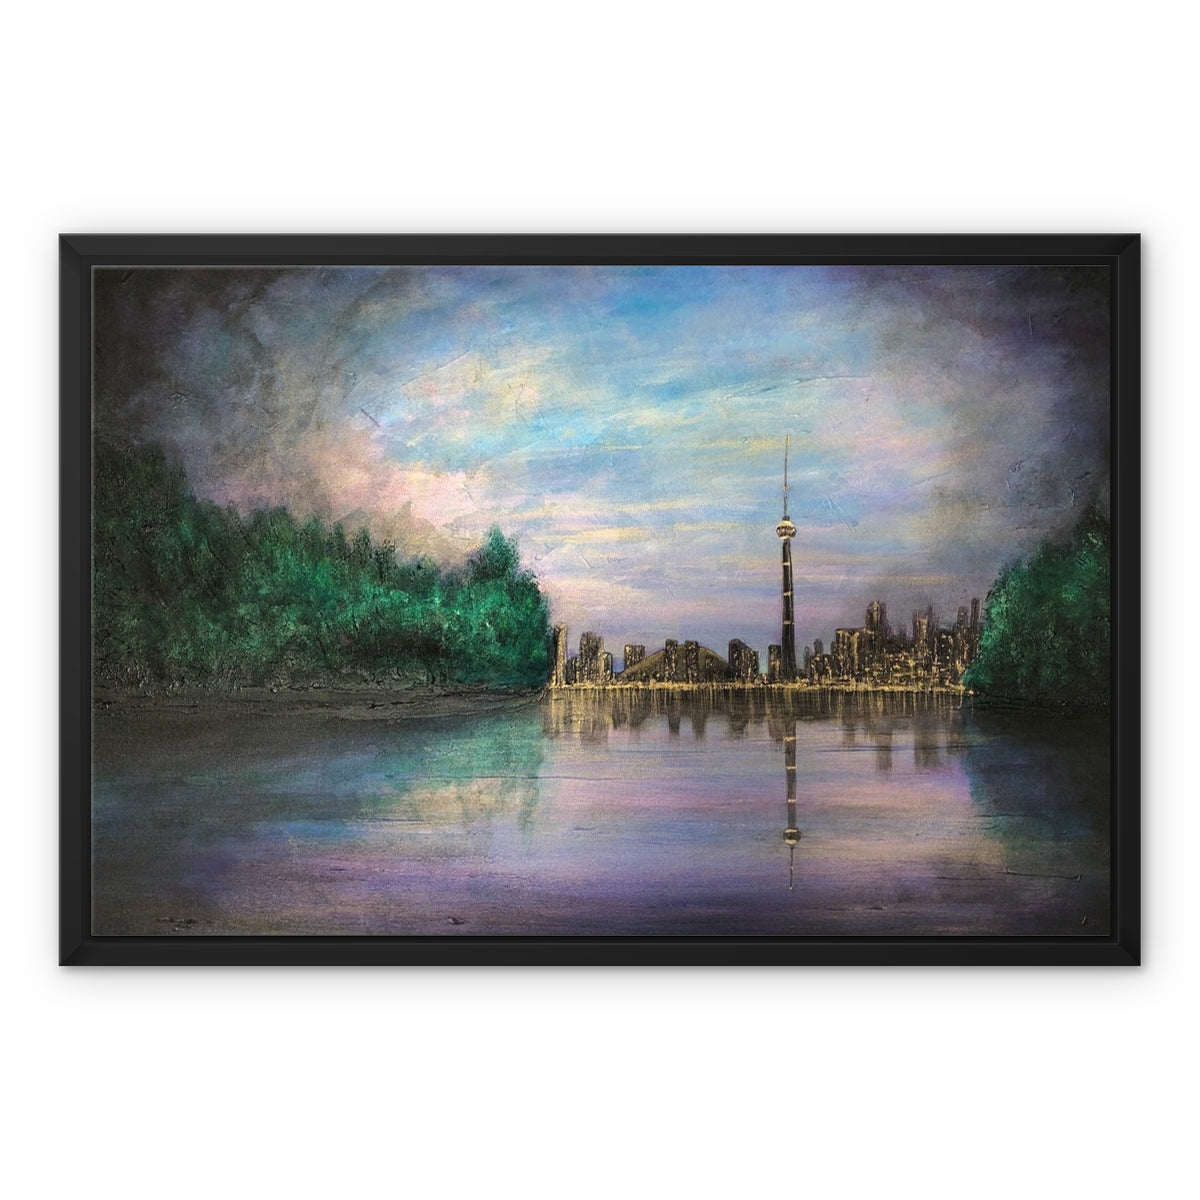 Toronto Last Light Painting | Framed Canvas From Scotland-Floating Framed Canvas Prints-World Art Gallery-24"x18"-Black Frame-Paintings, Prints, Homeware, Art Gifts From Scotland By Scottish Artist Kevin Hunter